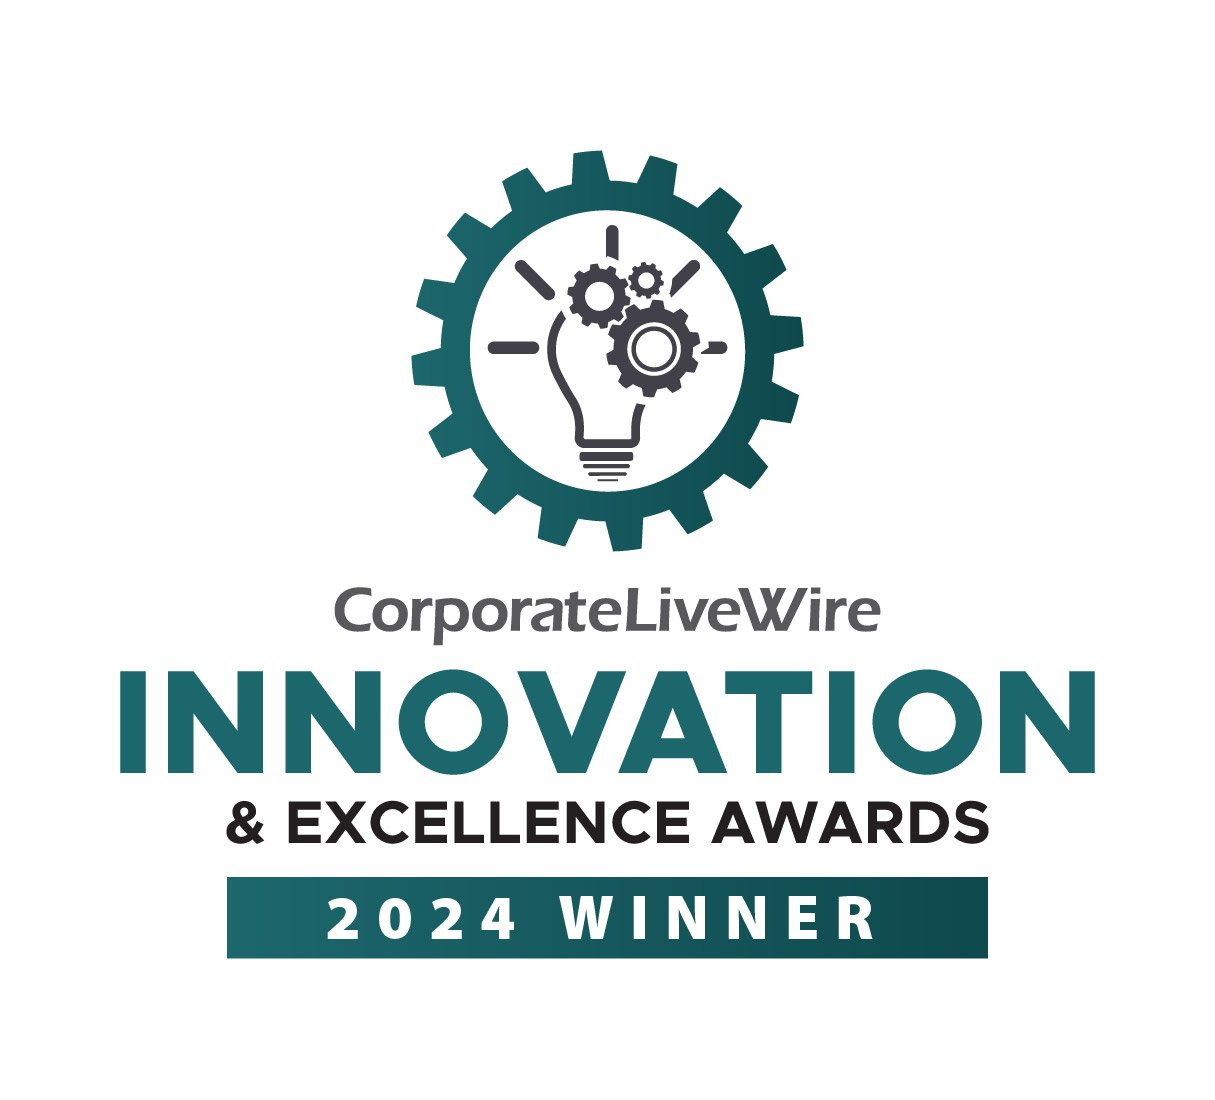 We are delighted to announce that we have won *Co-Working Space Provider of the Year* at the 2024 Innovation &amp; Excellence awards.

Thank you so much for the recognition Corporate LiveWire

#businessawards #businessaward #winnerwinner #winnerwinne